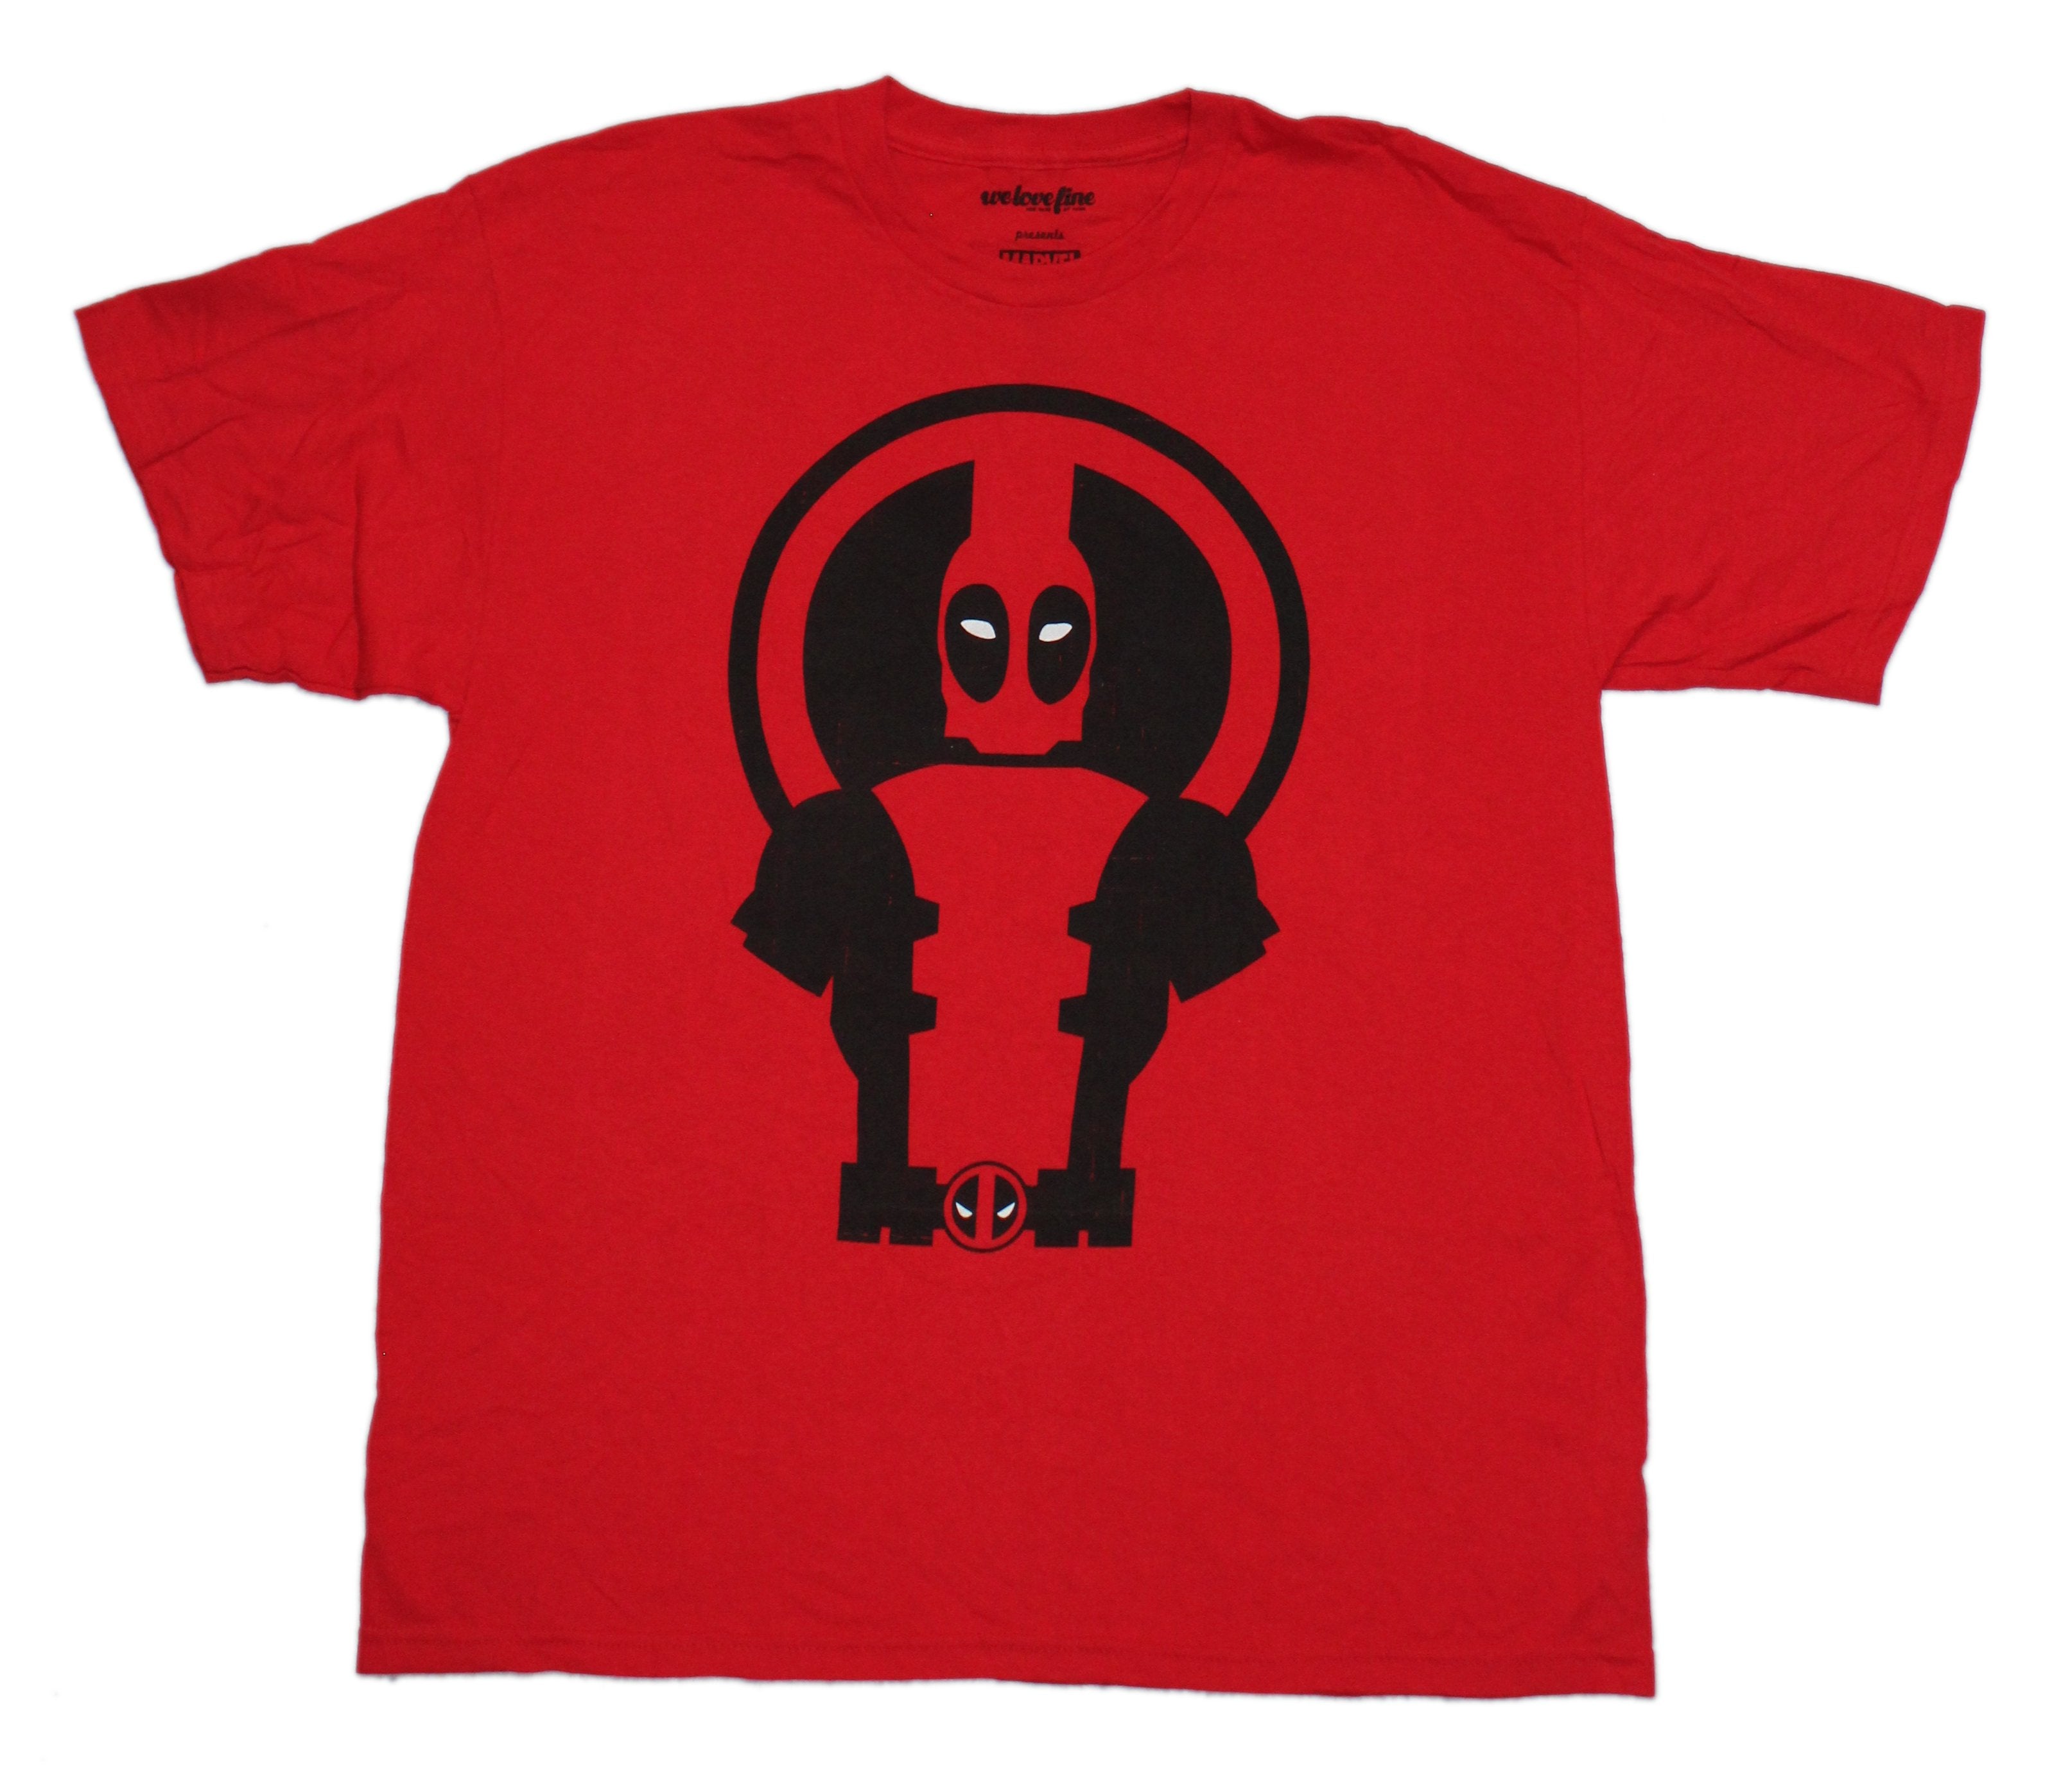 Deadpool Mens T-Shirt - Negative Space in Front of Symbol